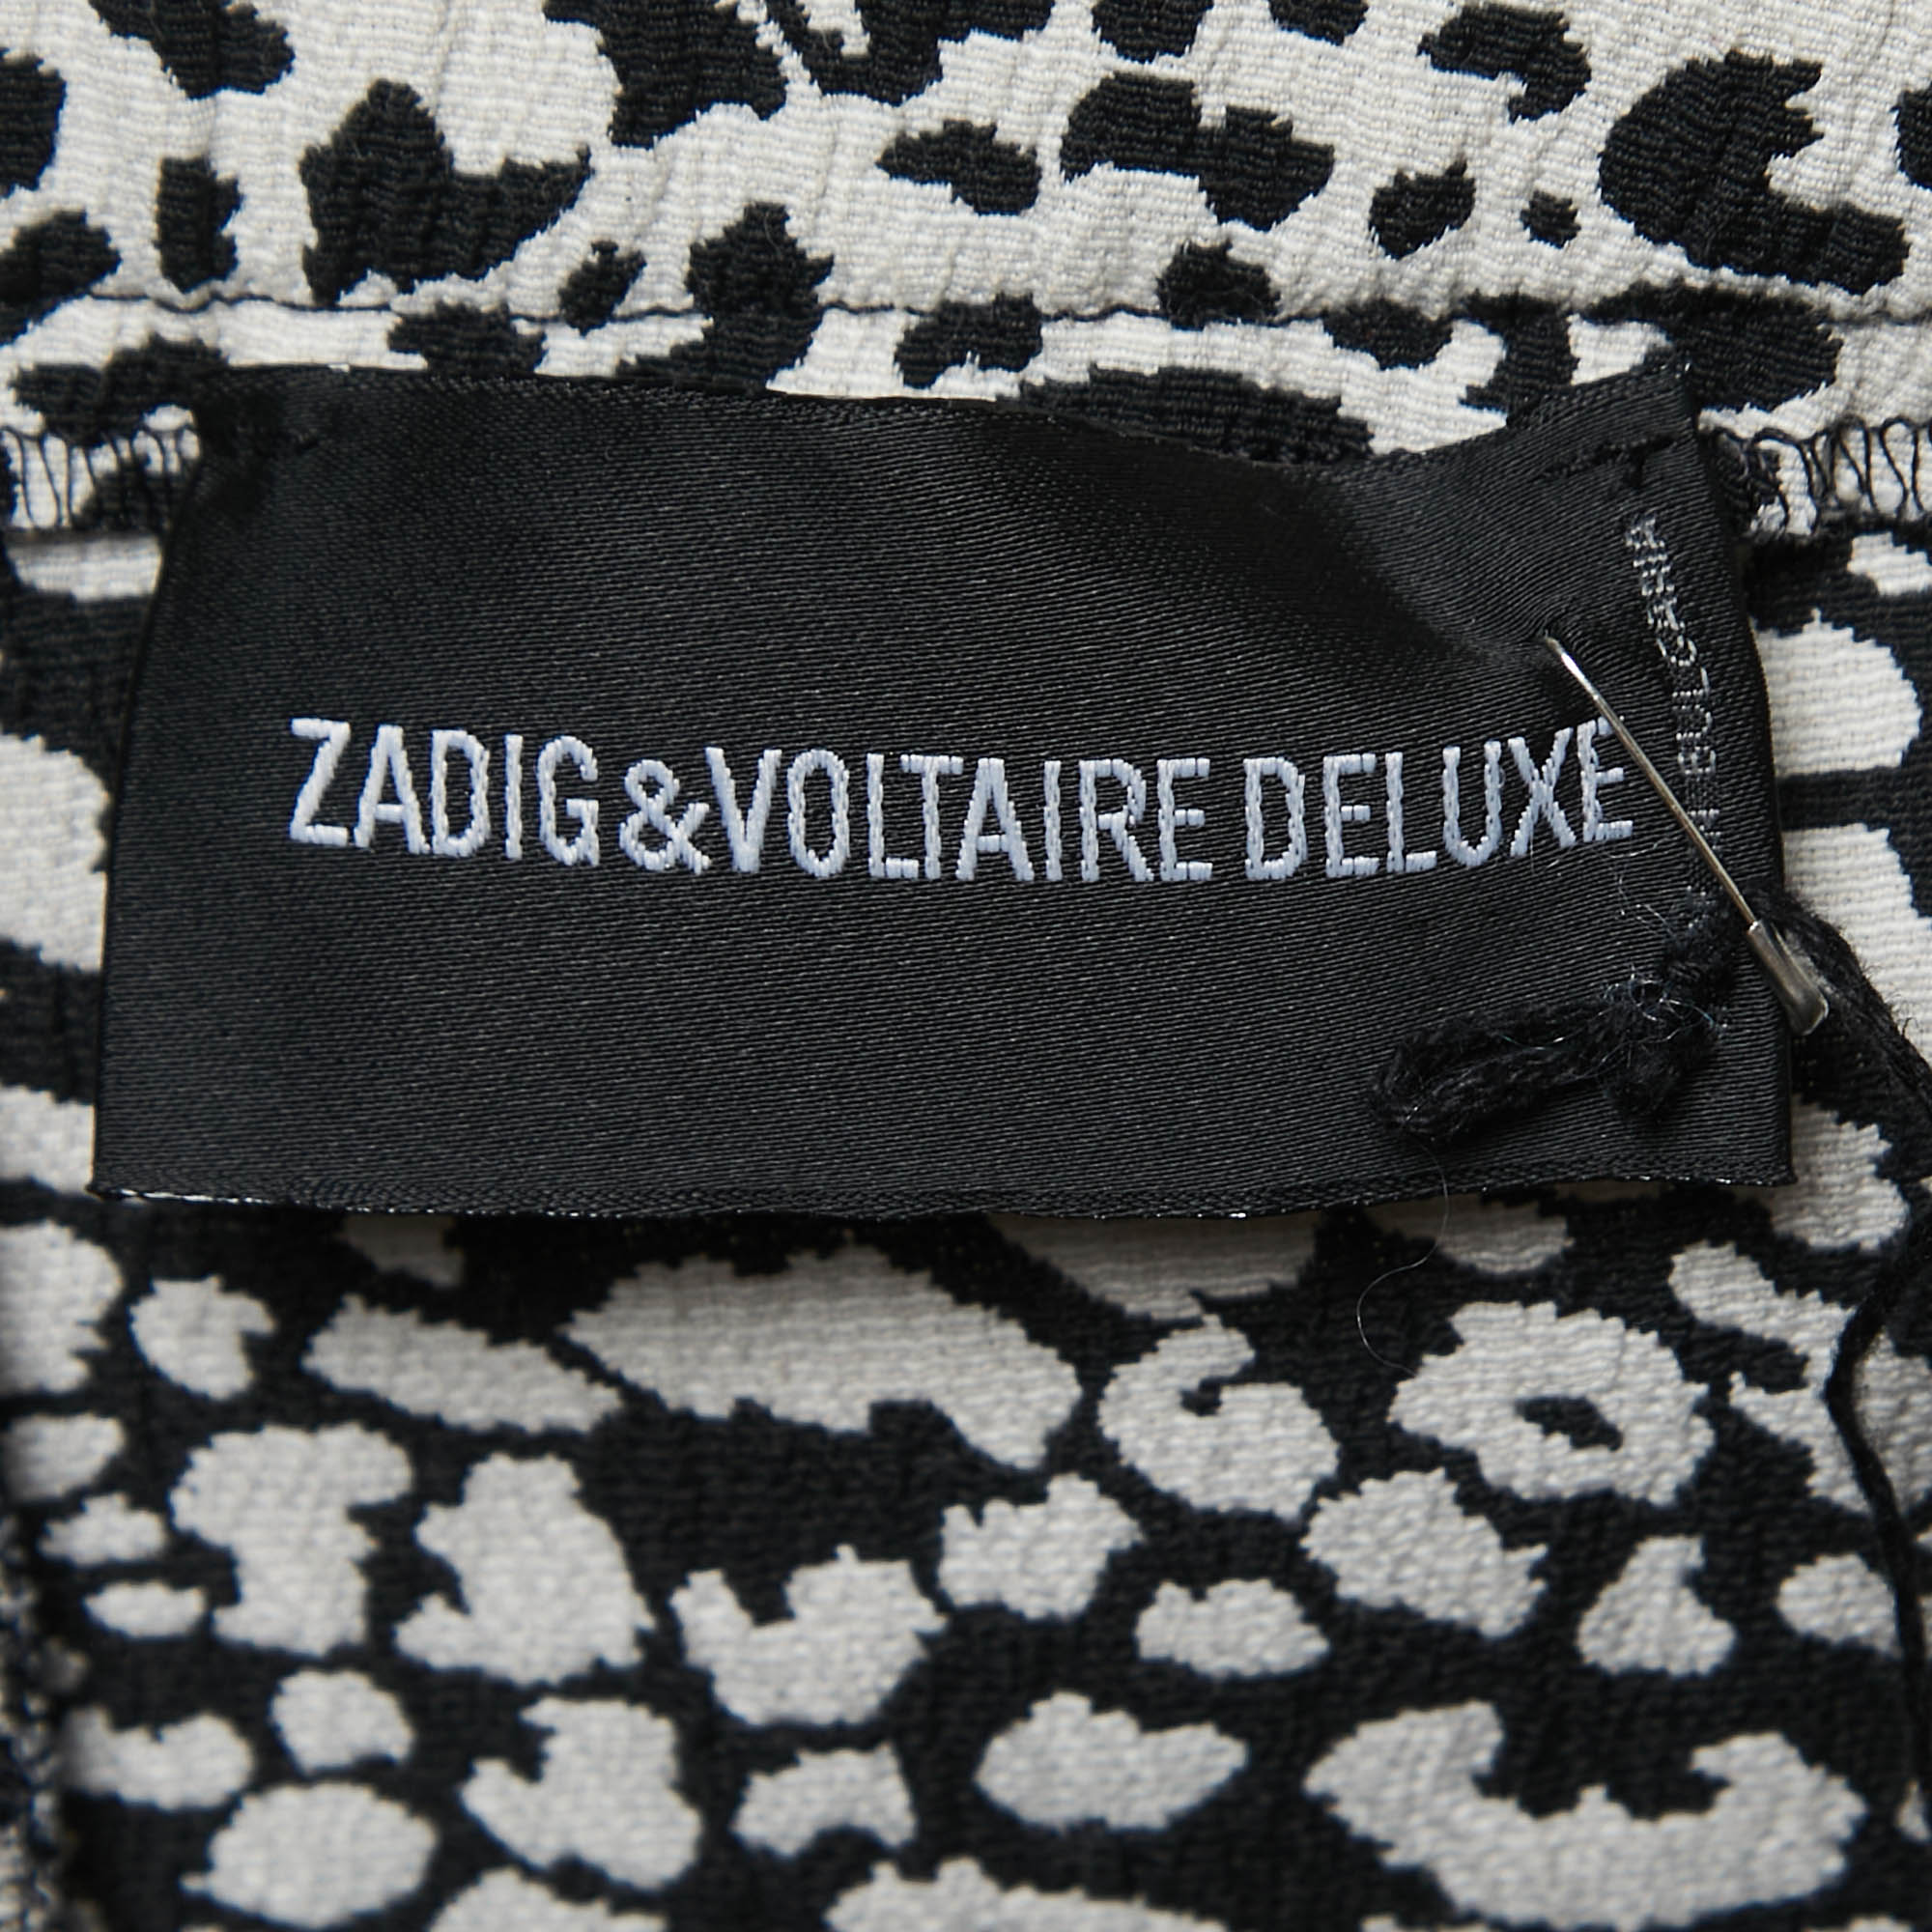 Zadig & Voltaire Black/White Animal Printed Cotton Blend Skinny Pants M